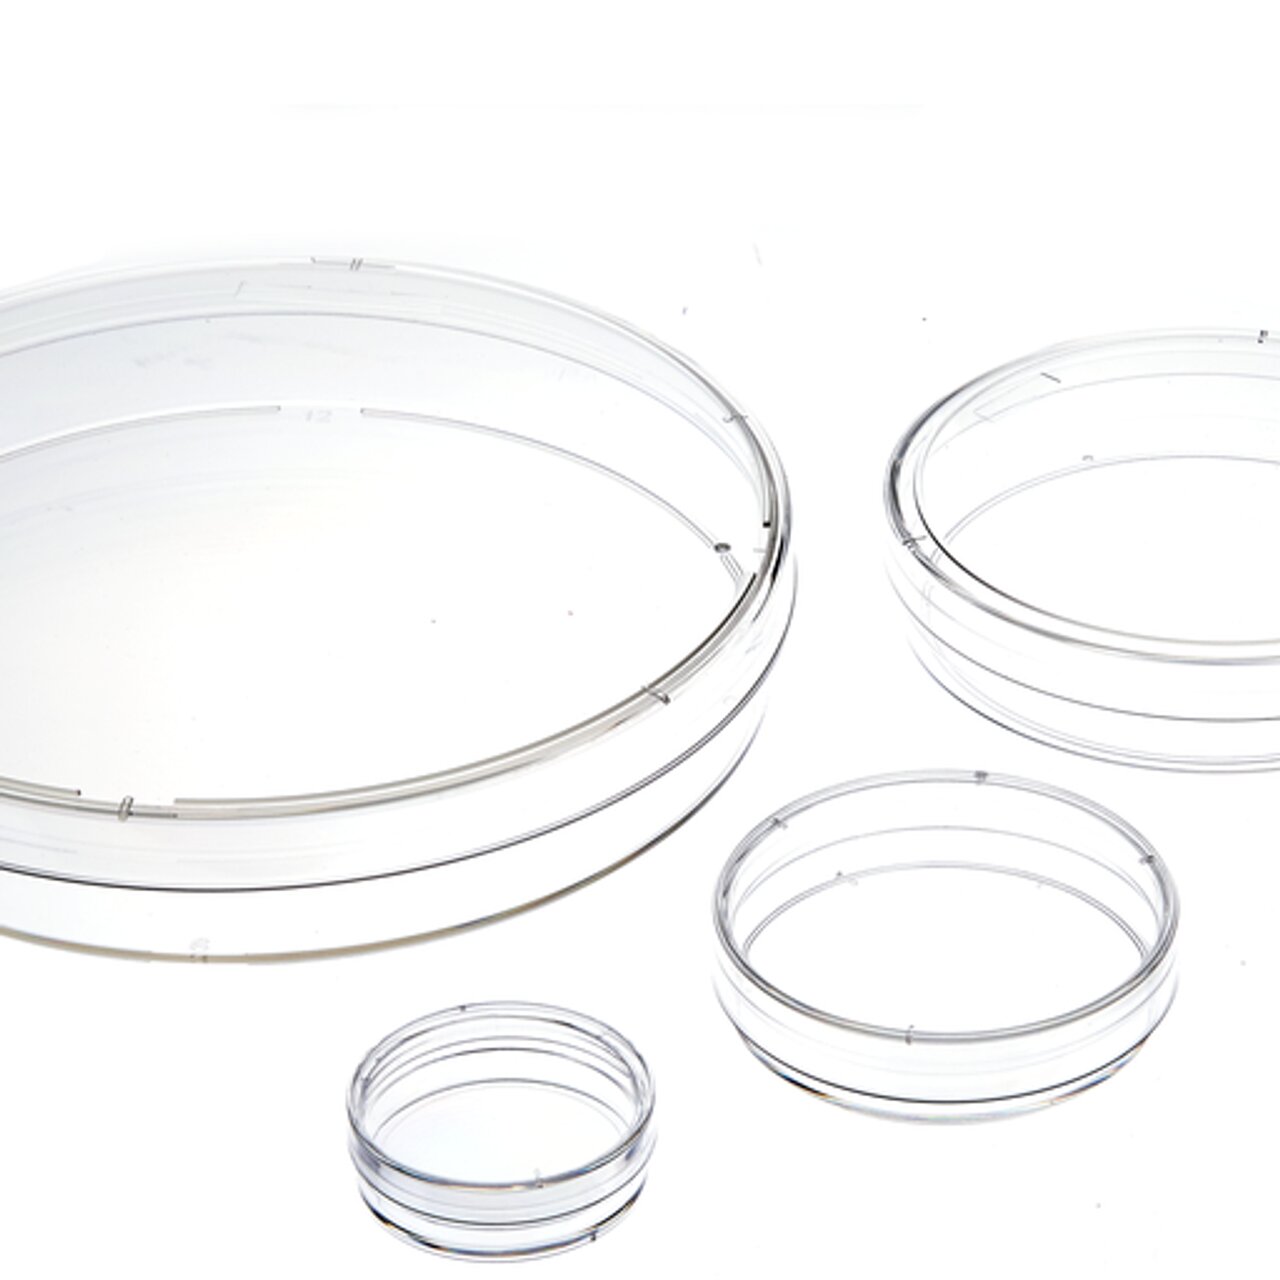 35mm cell culture dishes